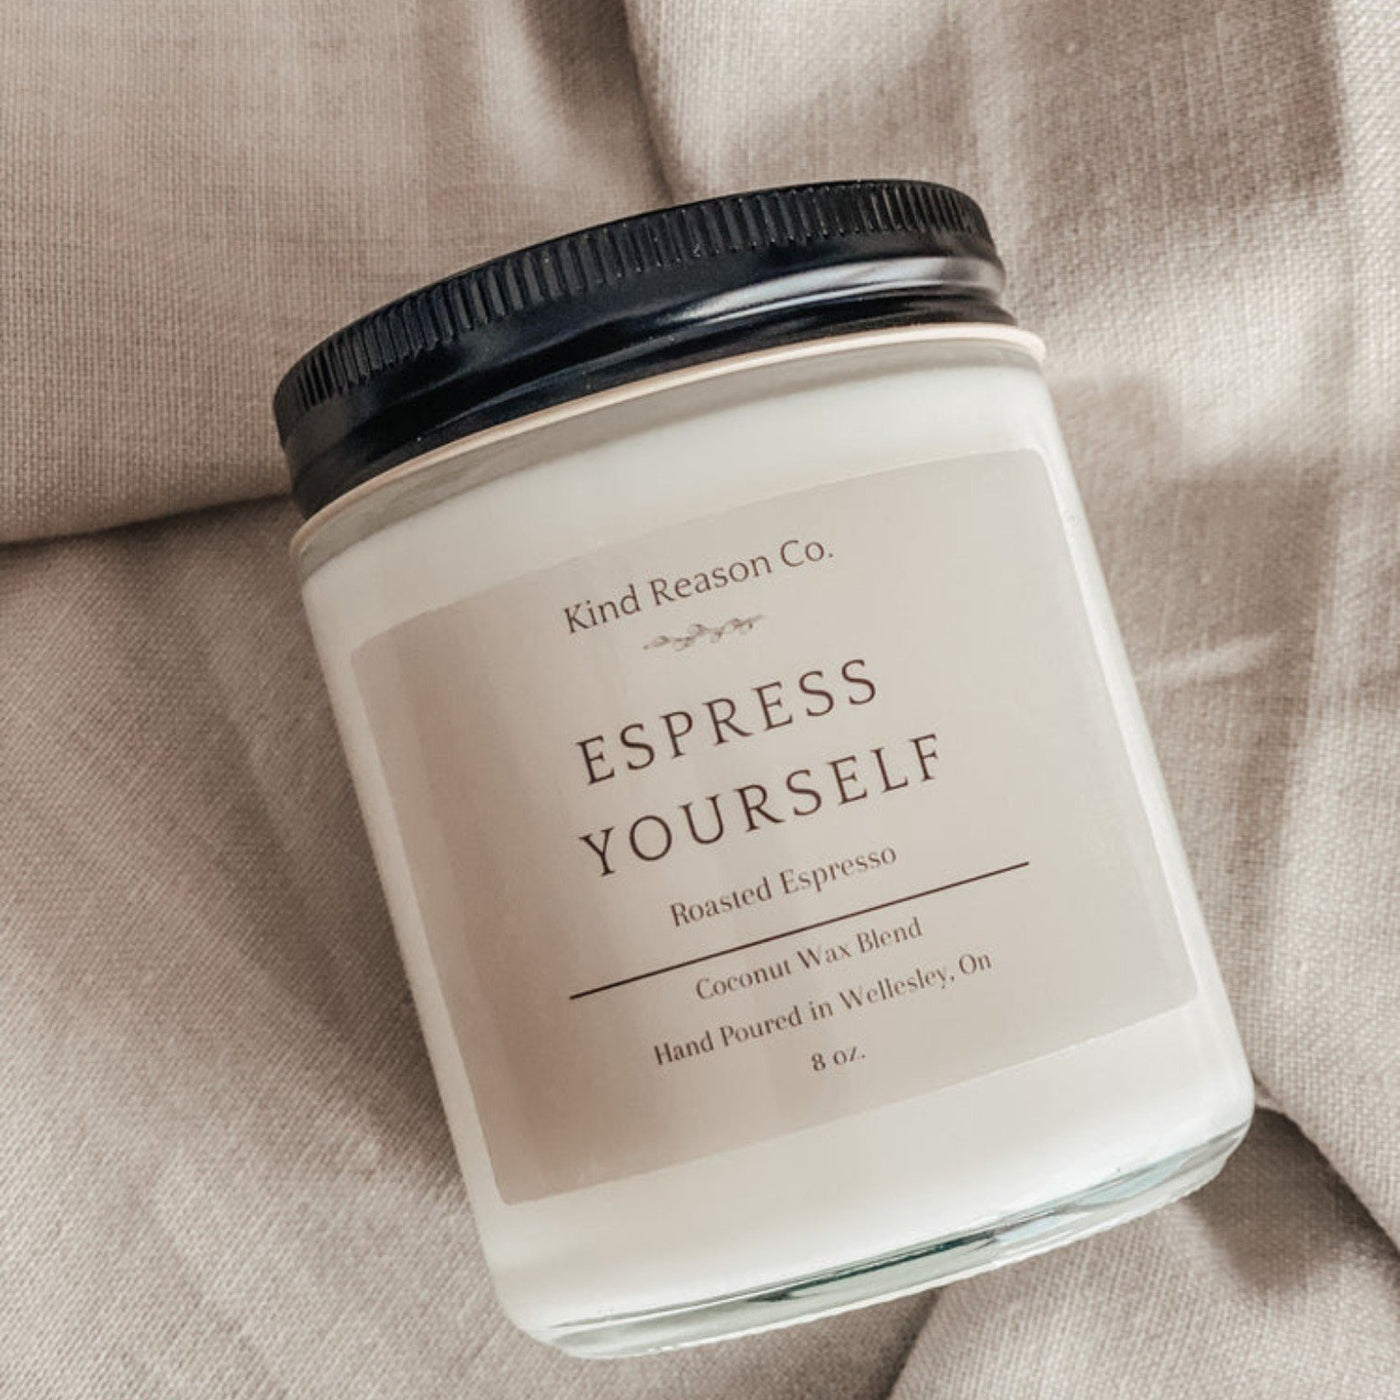 Toxin-Free Candle: Espress Yourself scent.  8oz. Made with coconut wax and all natural ingredients